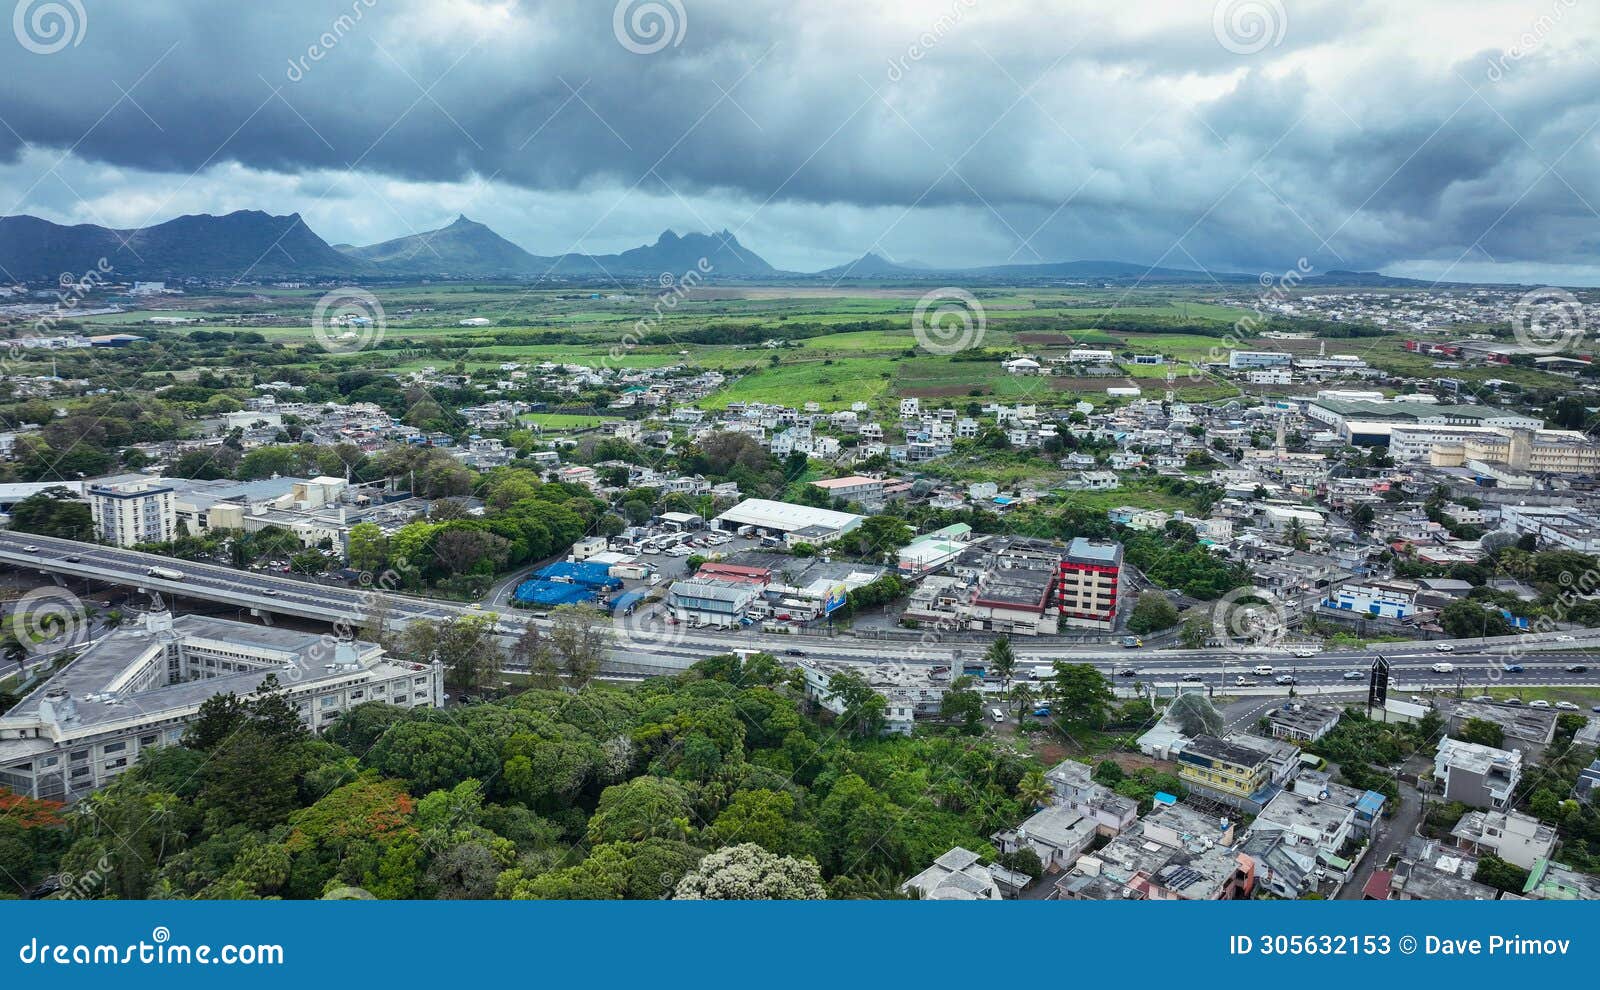 aerial view of quatre bornes city with mountains in the background